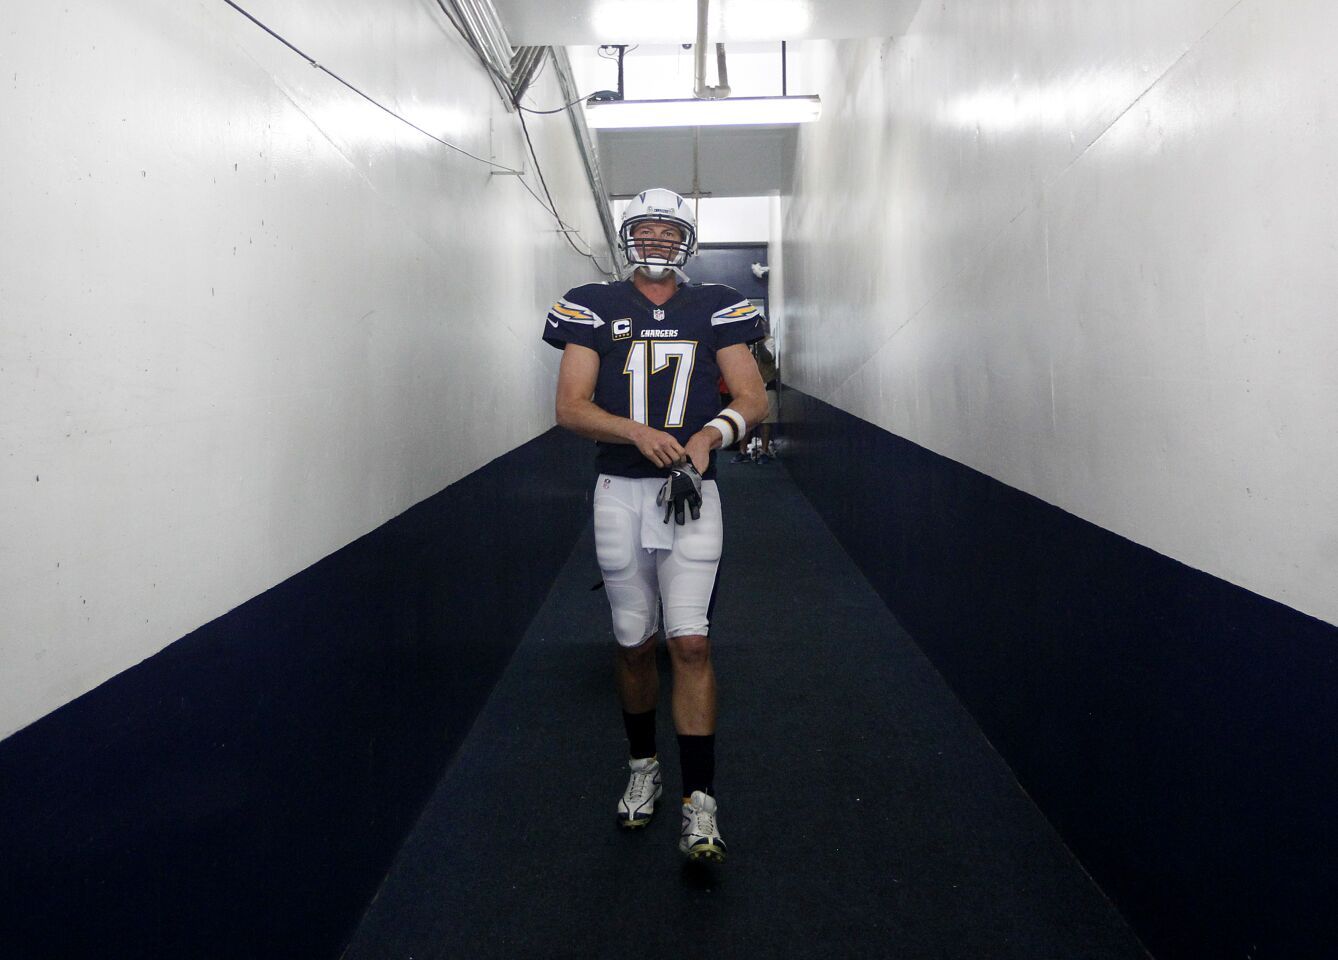 San Diego Chargers quarterback Philip Rivers takes the field before a game against the Kansas City Chiefs at Qualcomm Stadium on Sunday, Jan. 1, 2016.